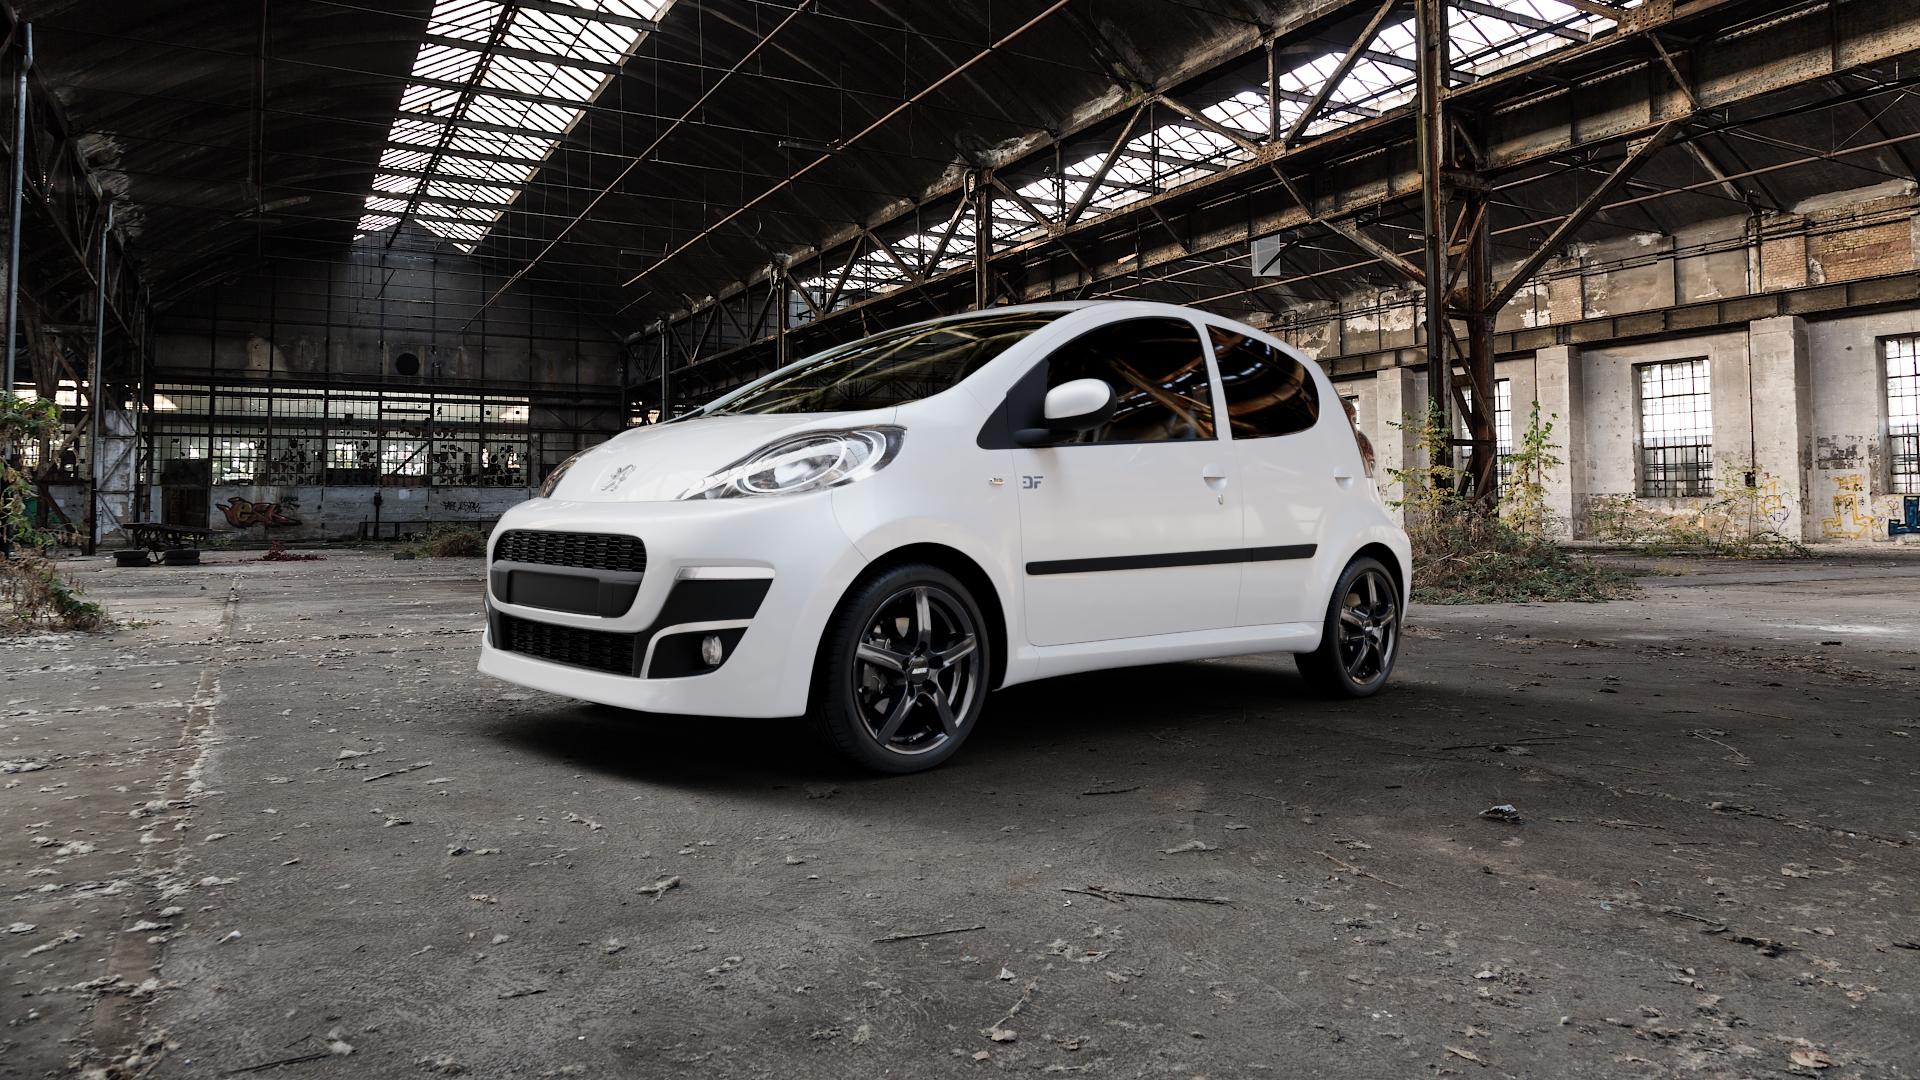 Peugeot 107 1,0l 50kW (68 hp) Wheels and Tyre Packages